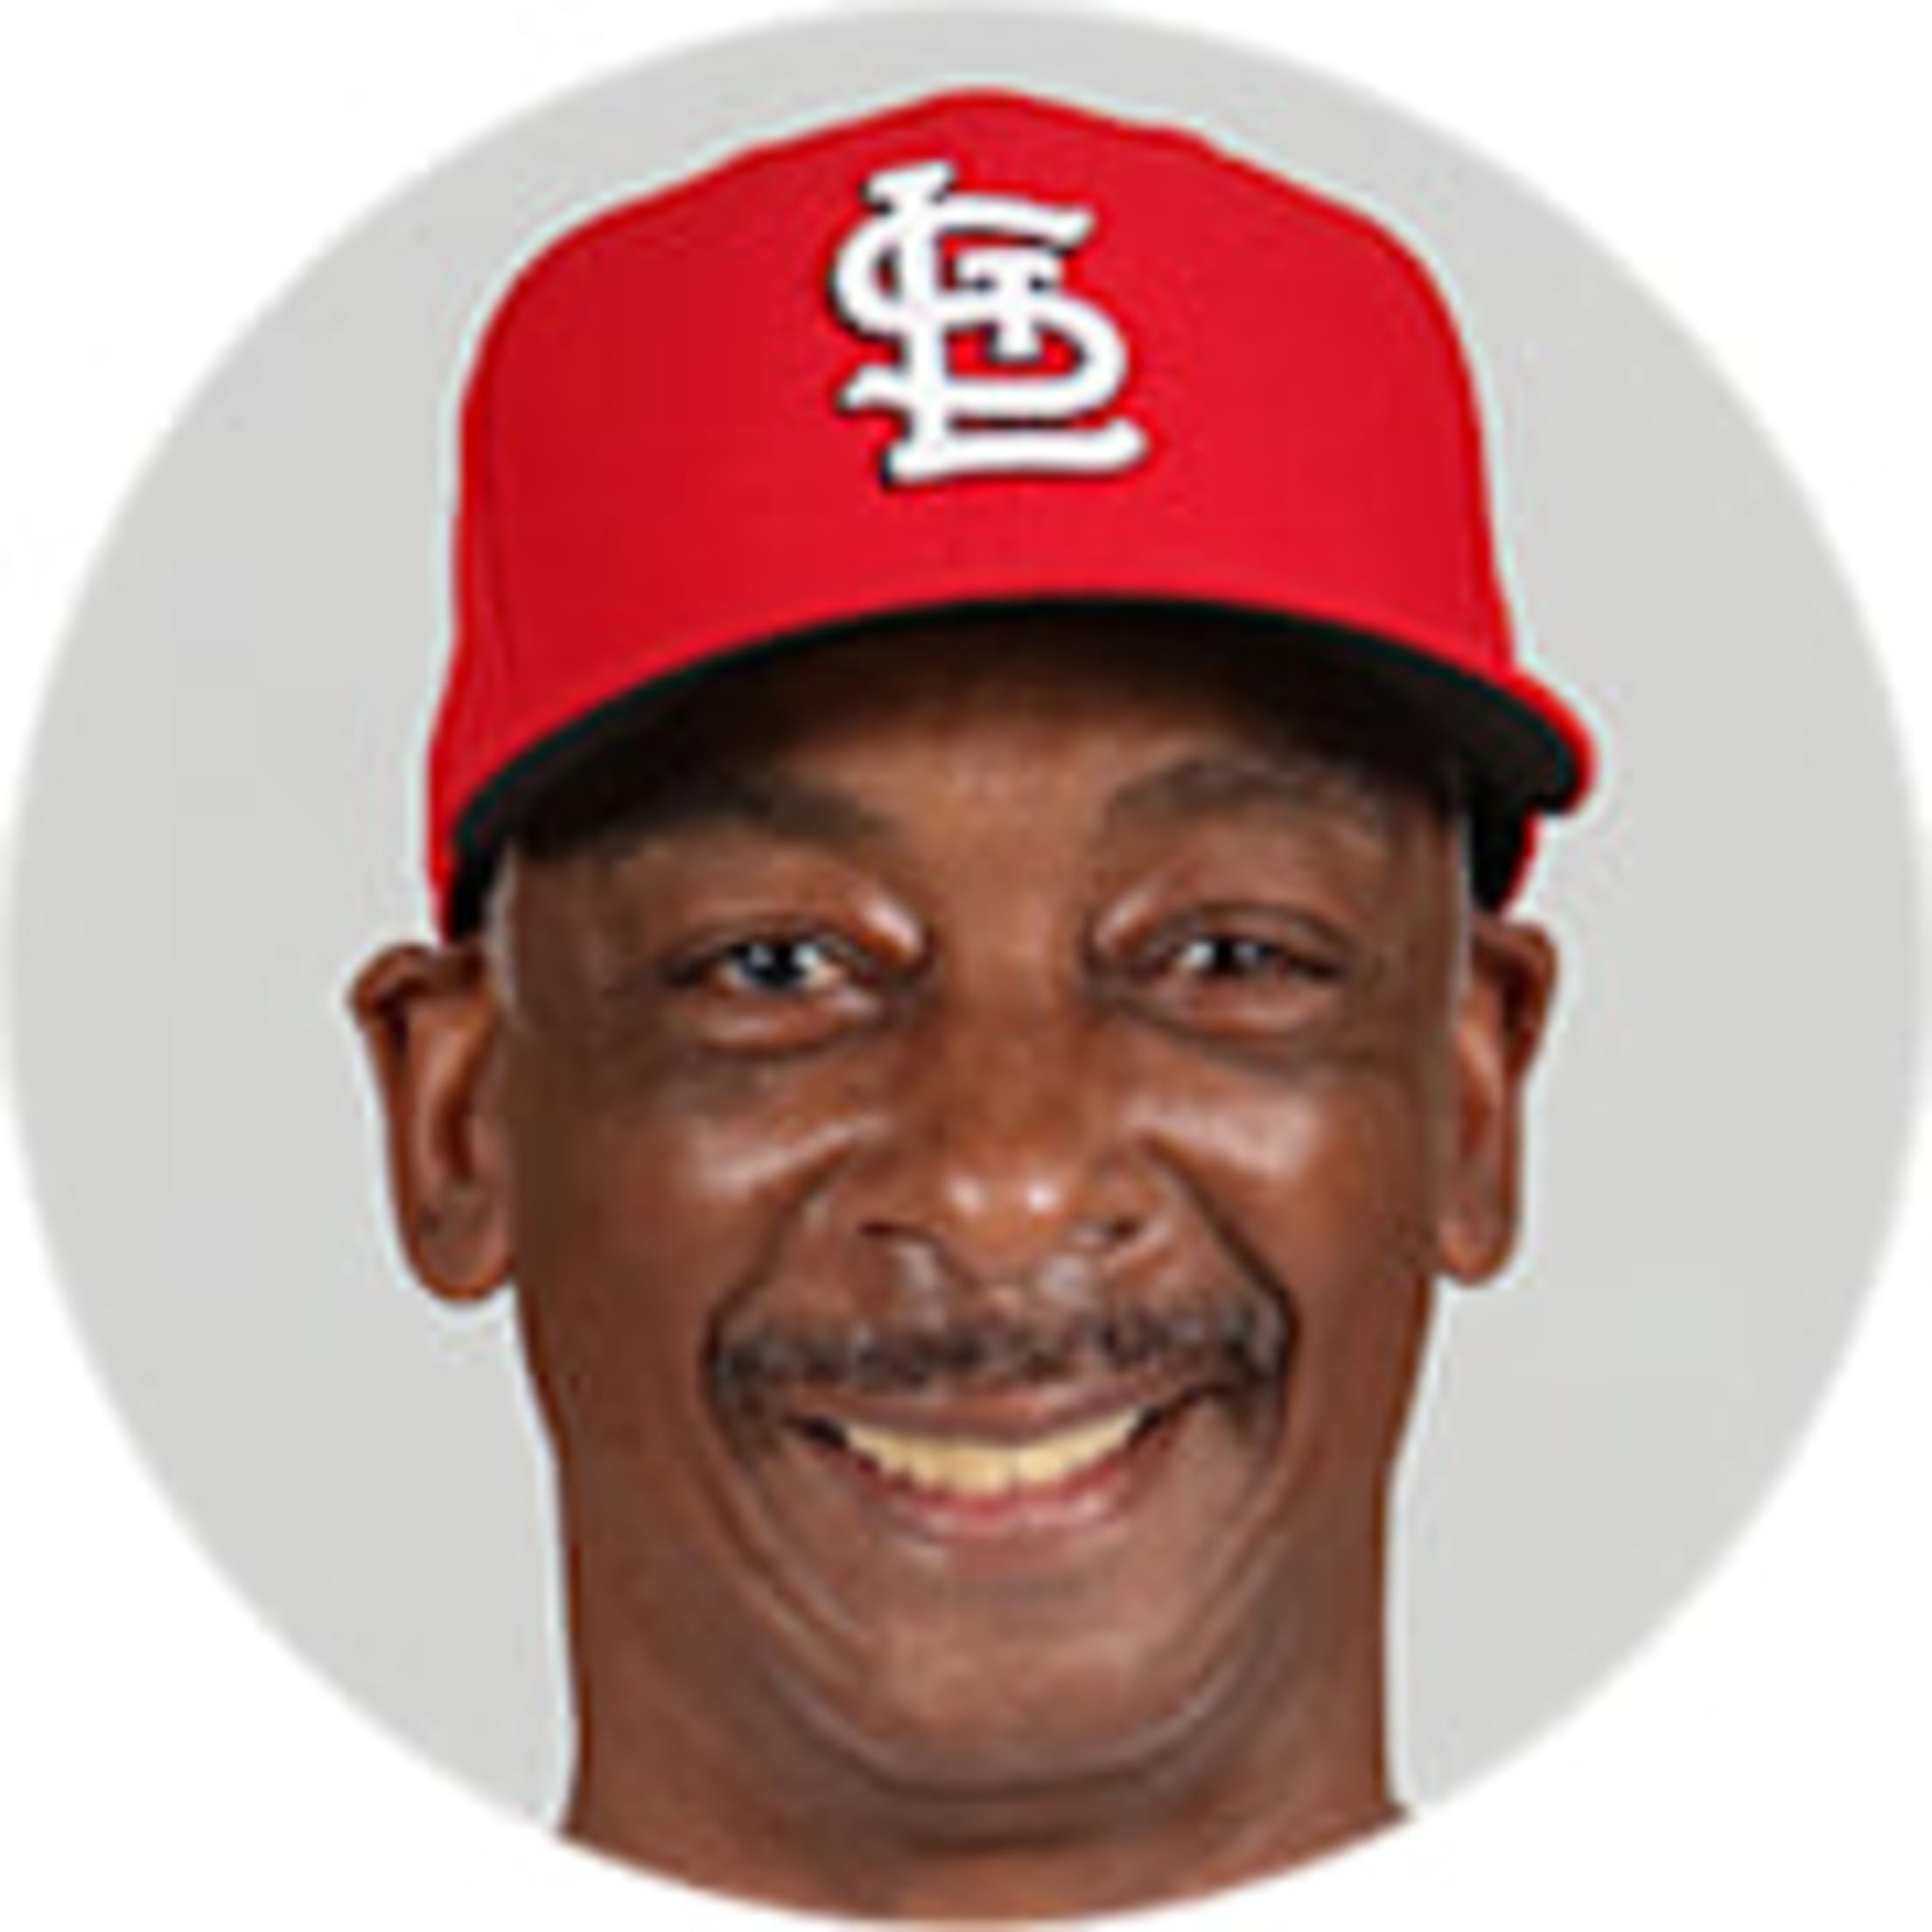 Why the Yankees traded Willie McGee to the Cardinals